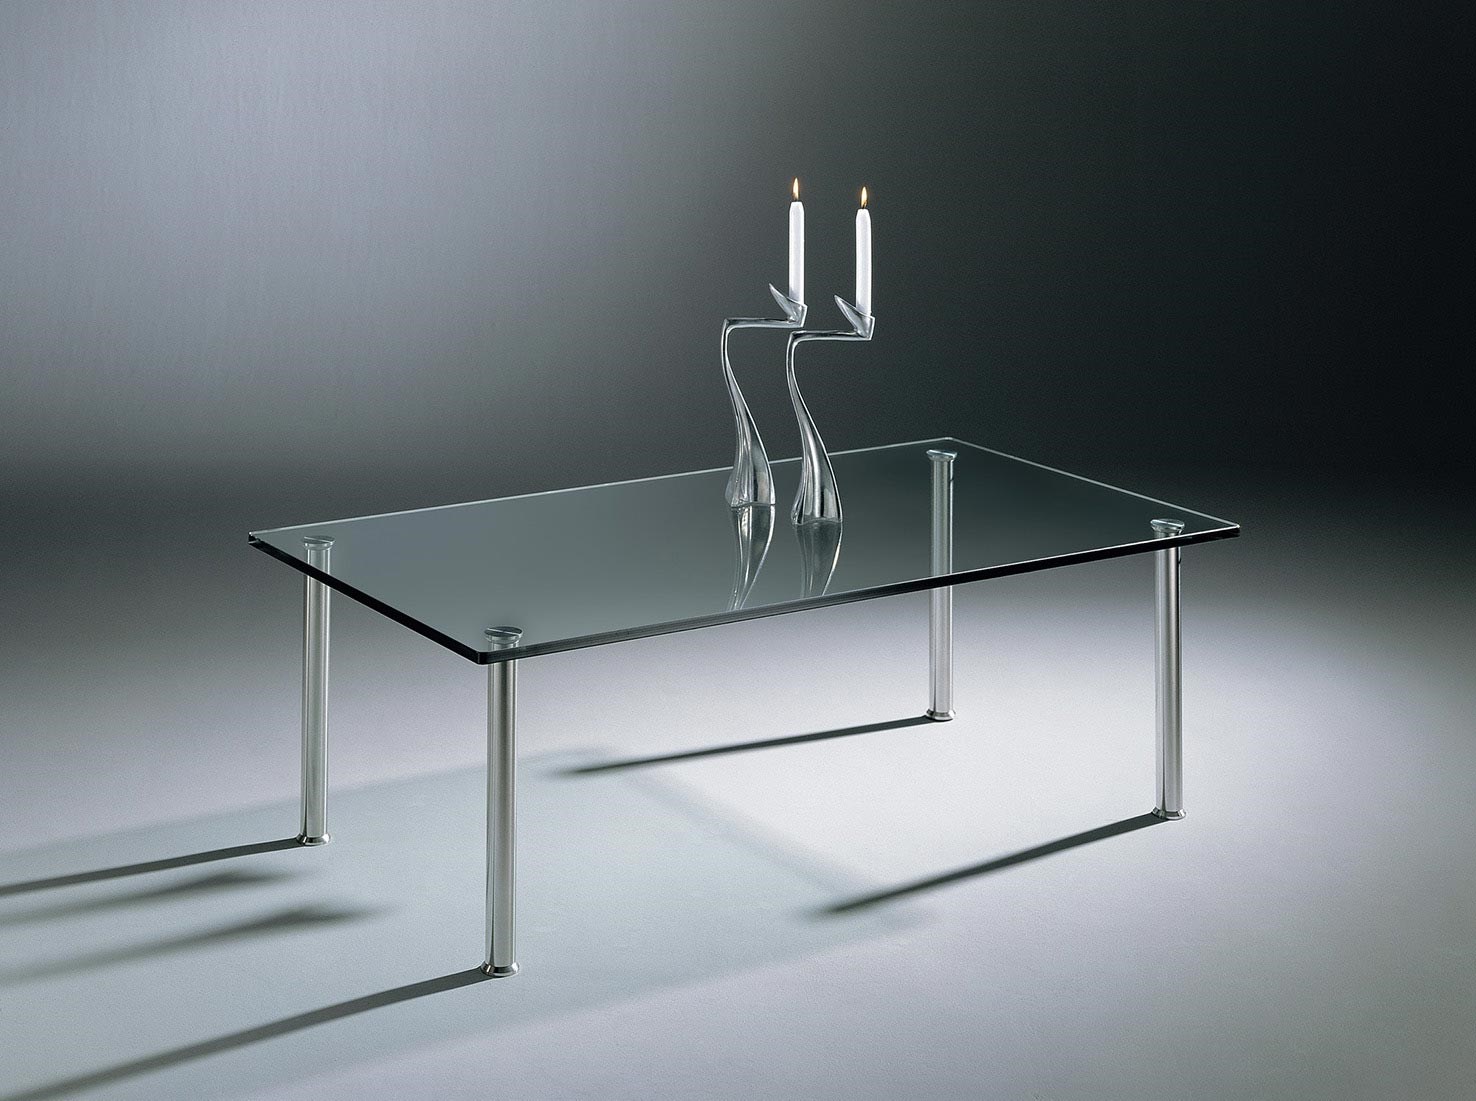 Glass cocktail table SIRIUS by DREIECK DESIGN: S 2740 - FLOATGLASS clear - rounded corners - table feet stainless steel brushed